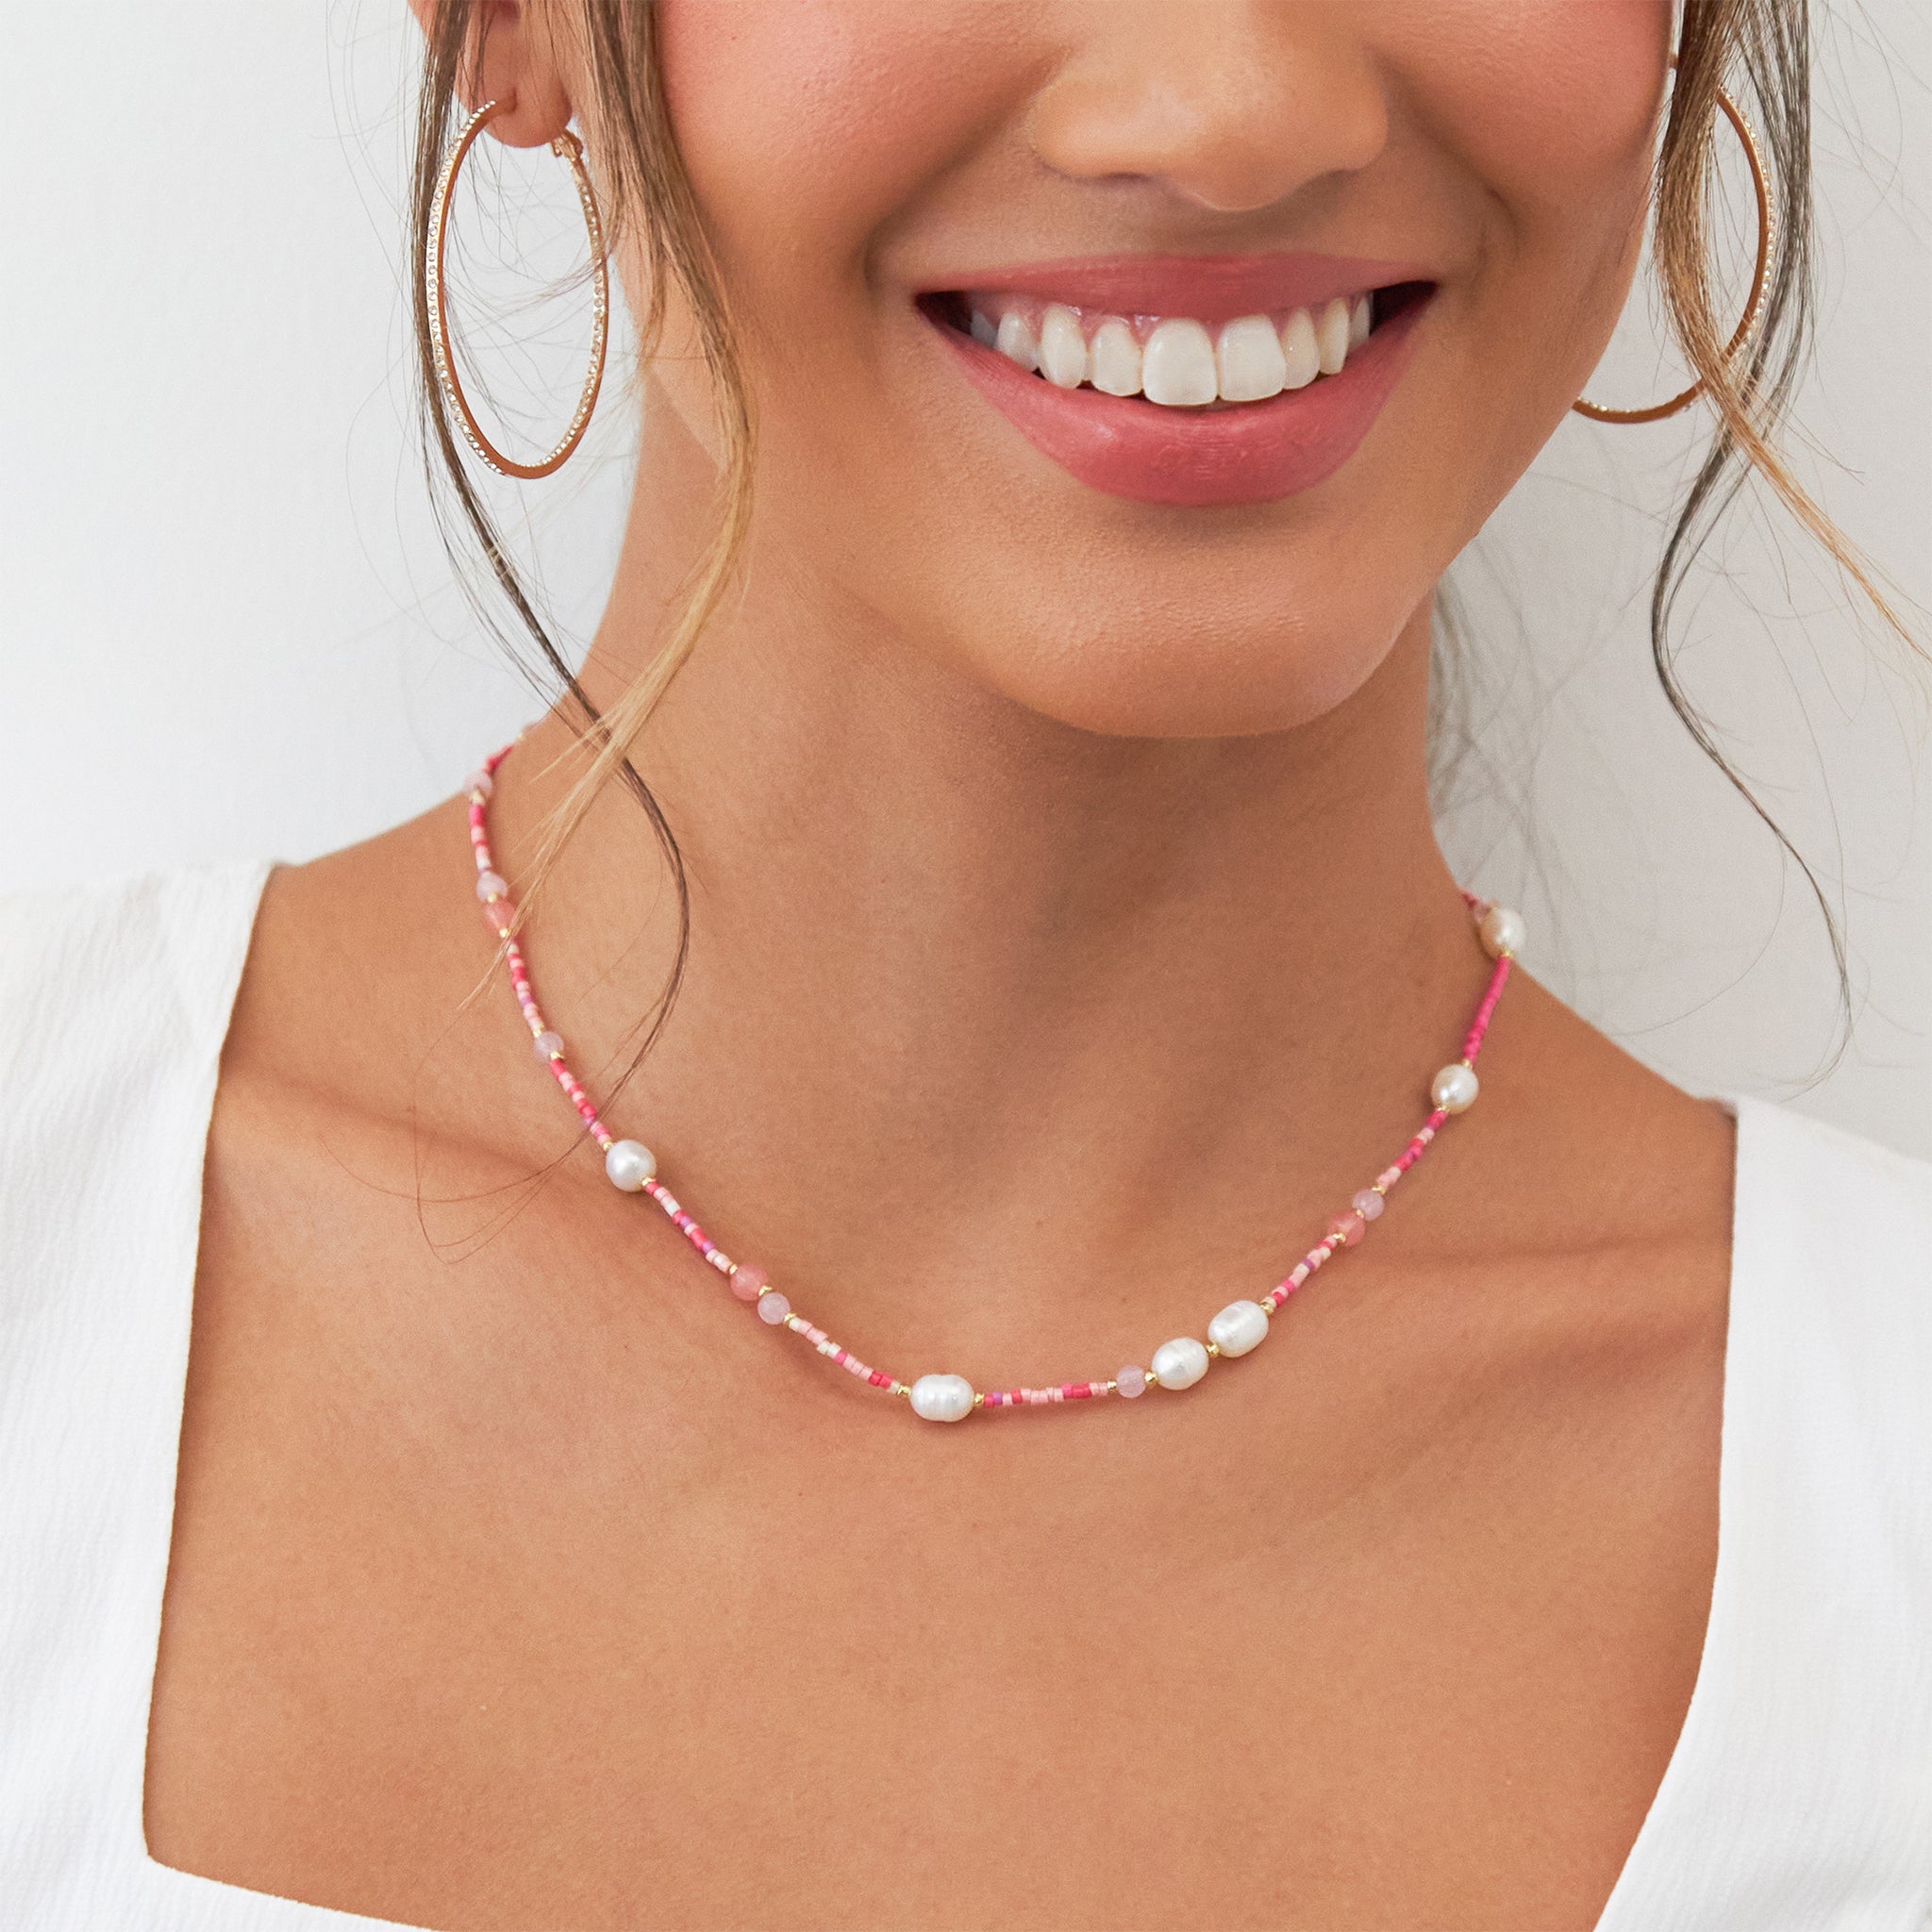 Beads and Pearls Necklace in Pink